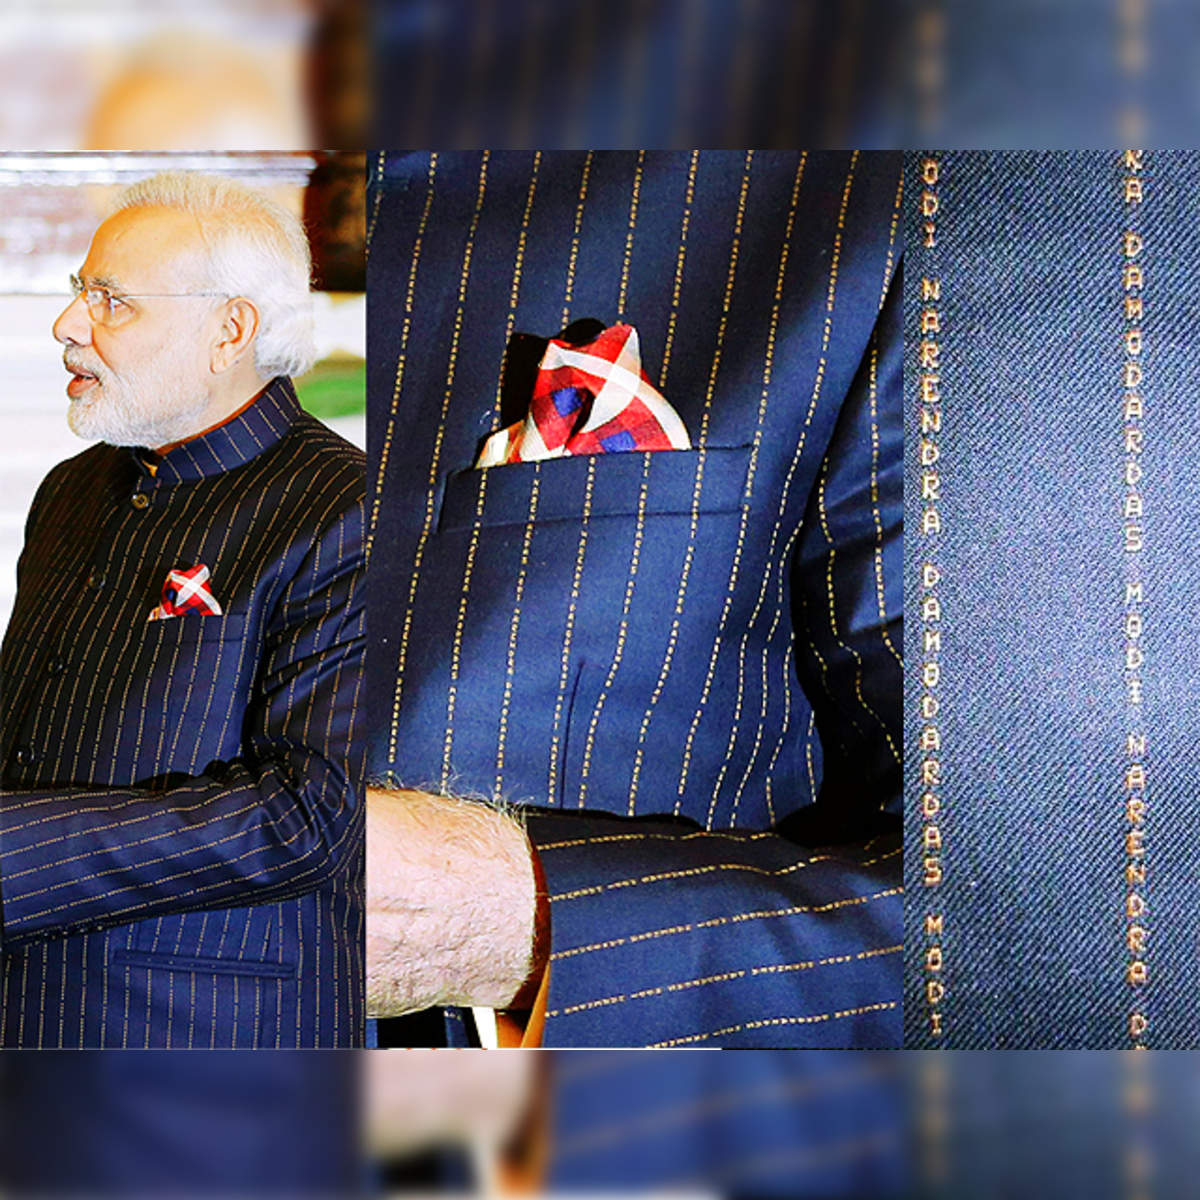 How media calculated the figure of Rs 10 lakh for Modi suit without caring  for facts